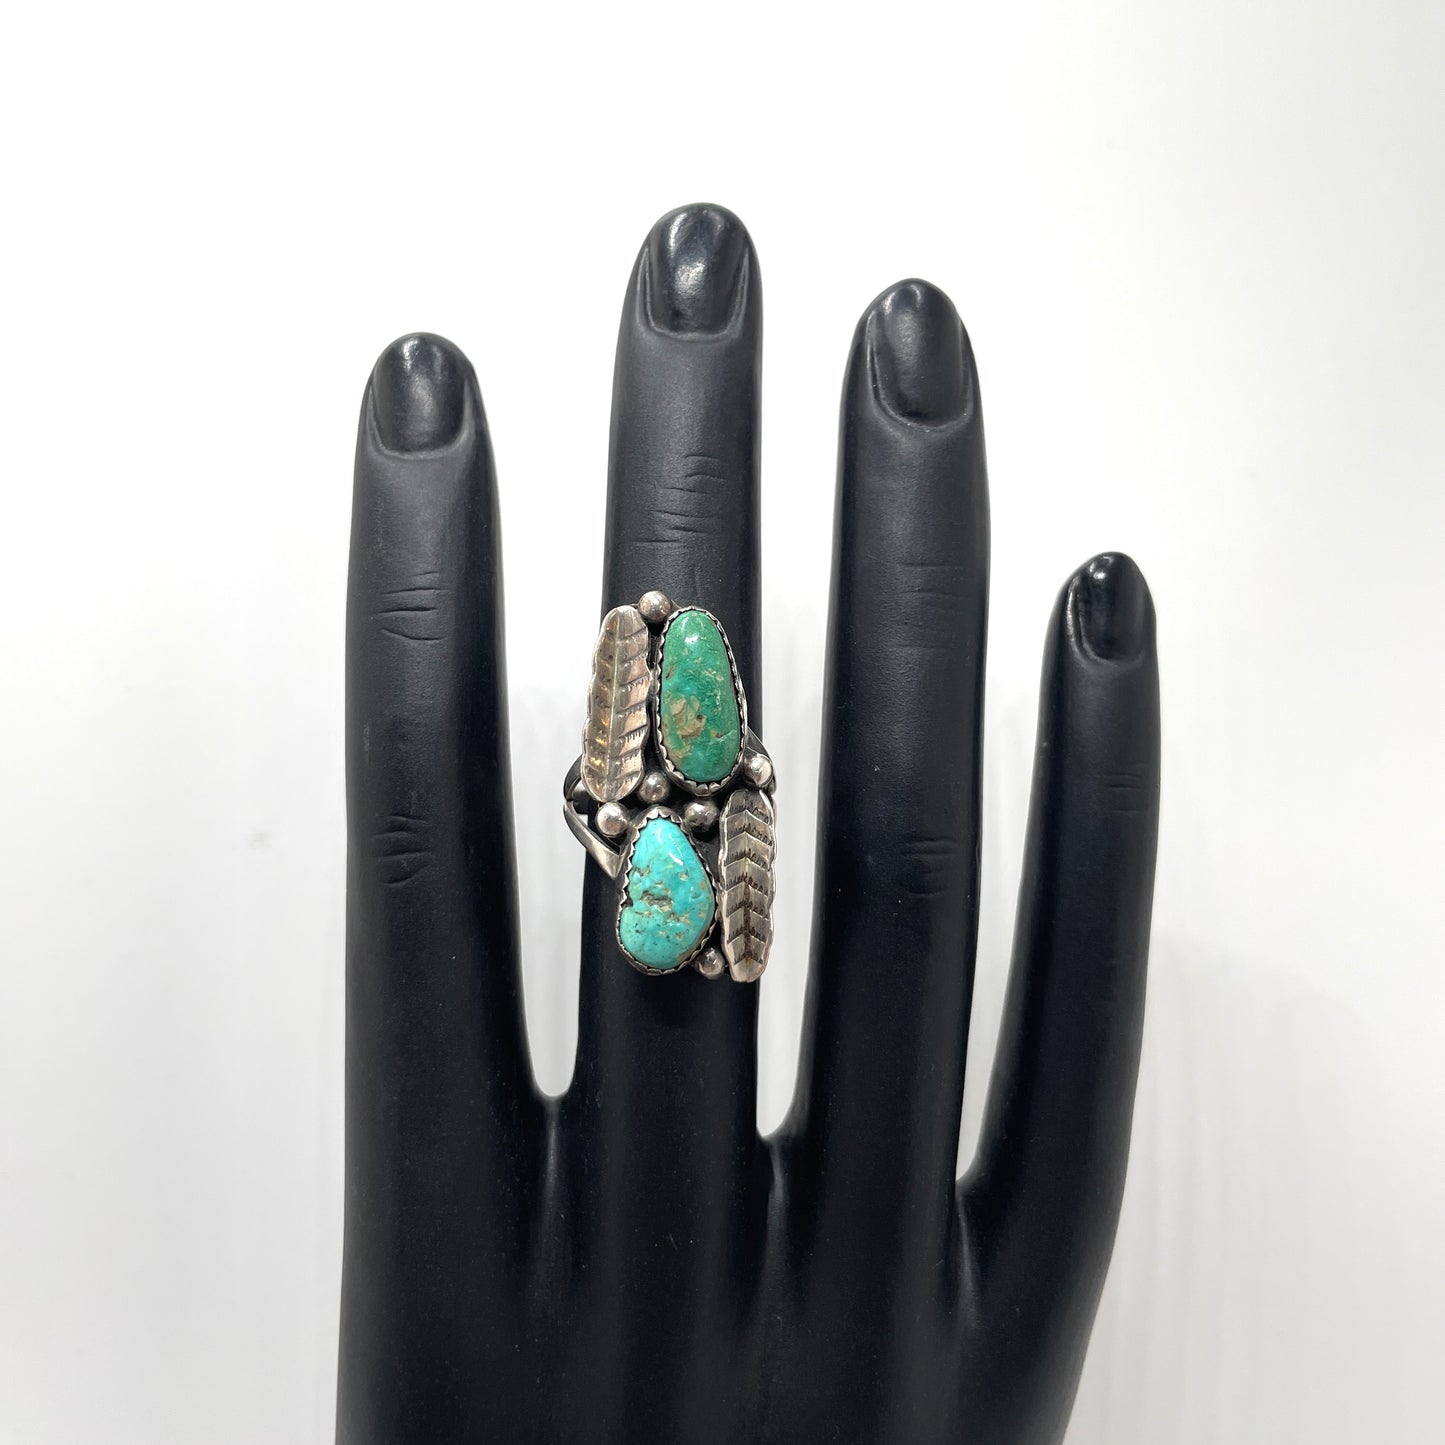 Vintage Sterling Silver & Turquoise Ring - Size 7